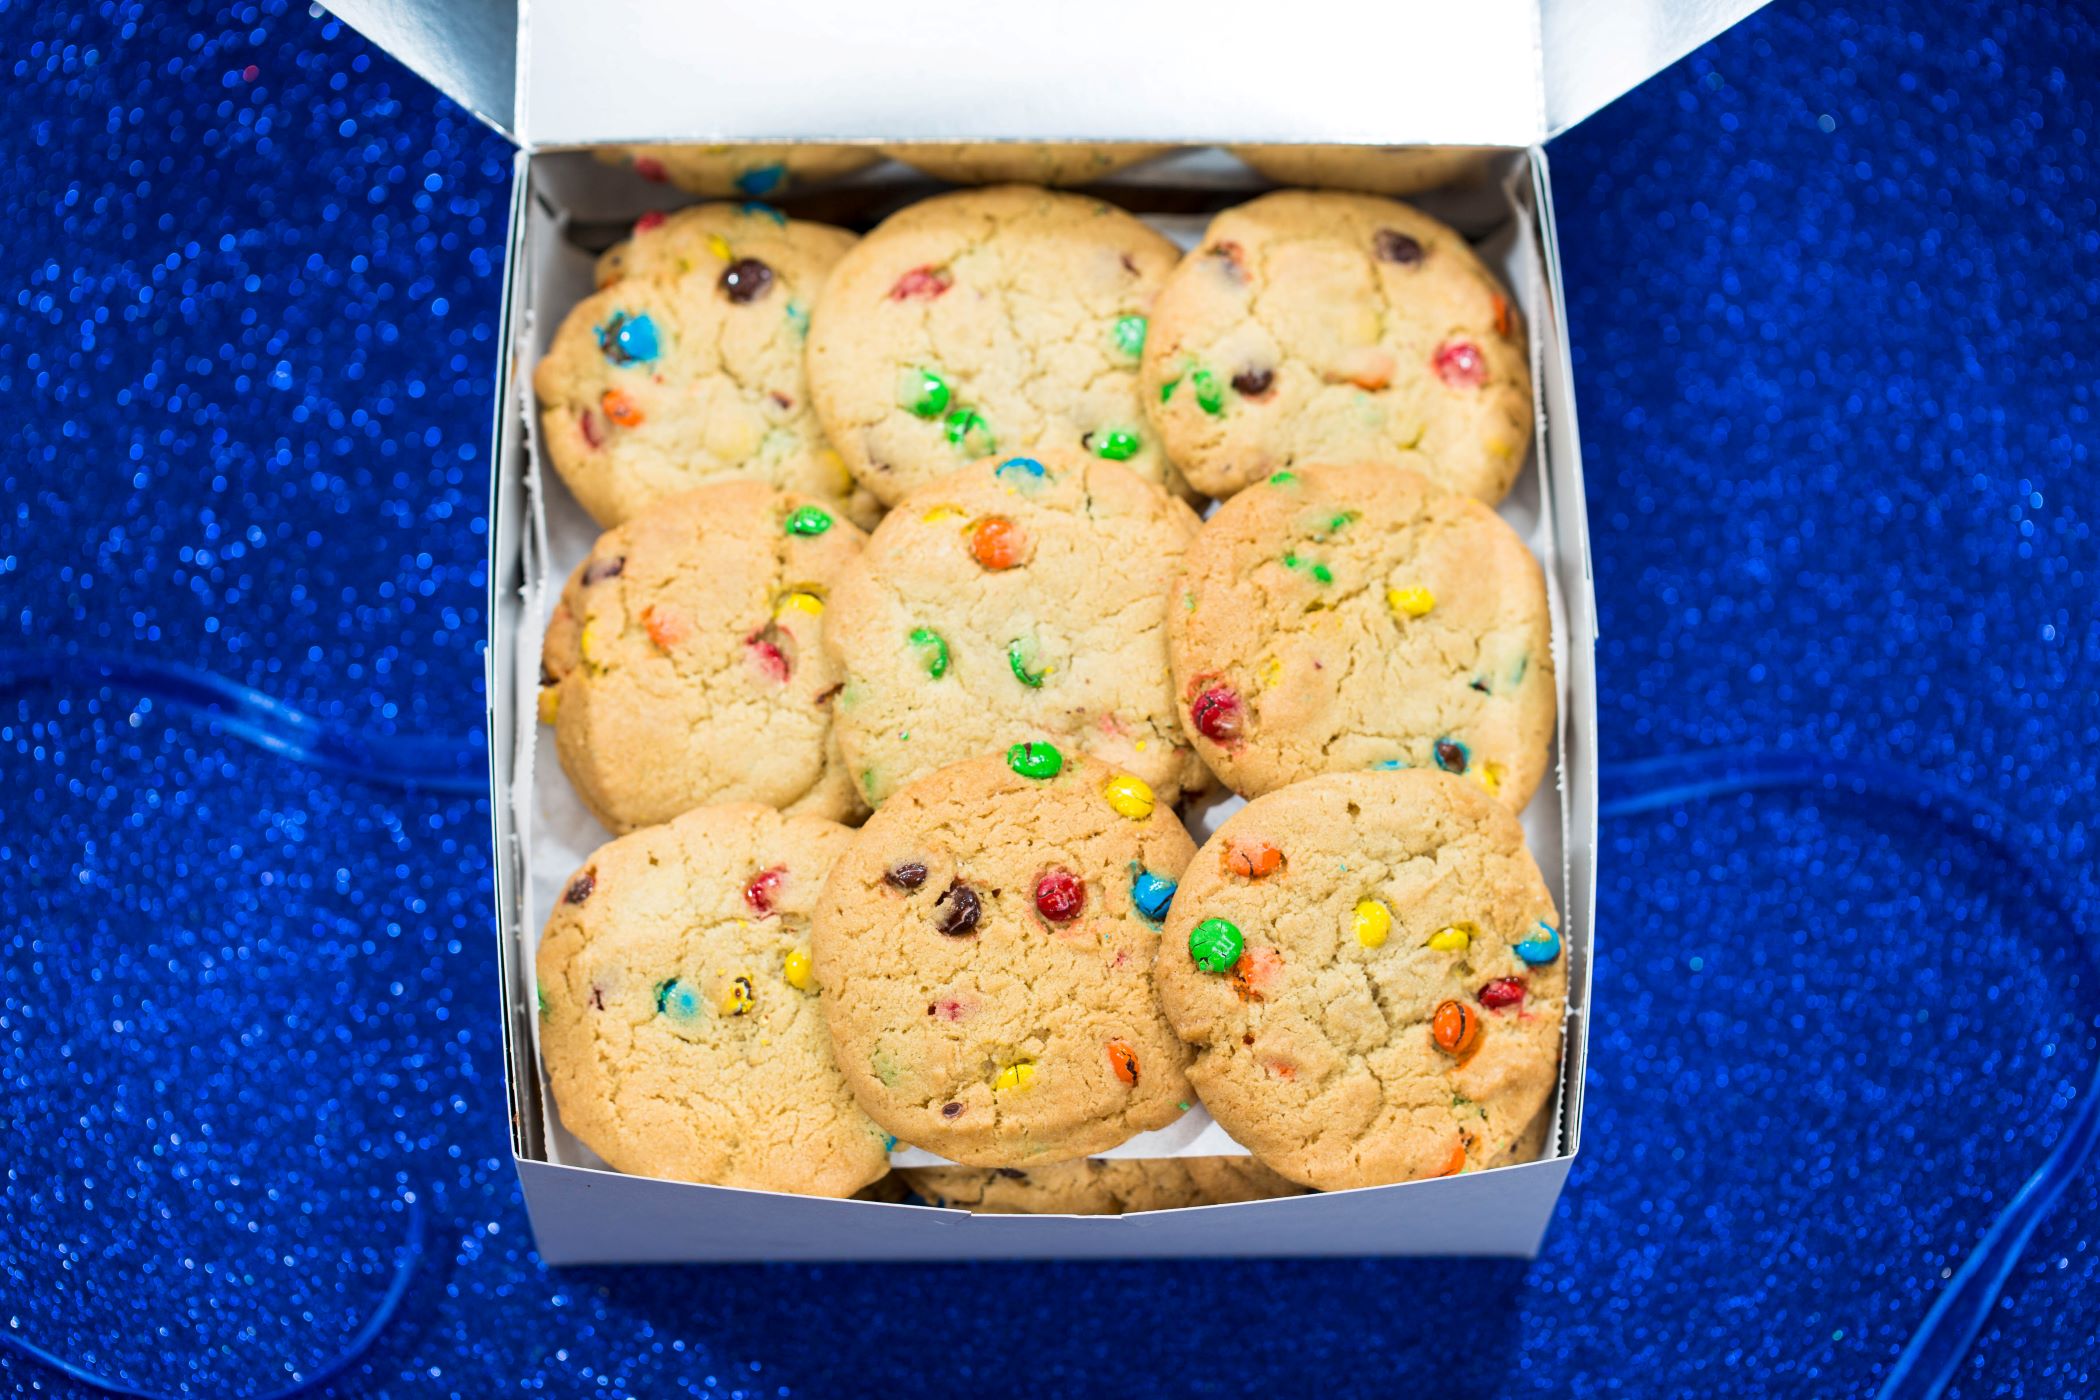 An image of a gift box of Tiff's Treats with the sugar cookie with M&Ms.